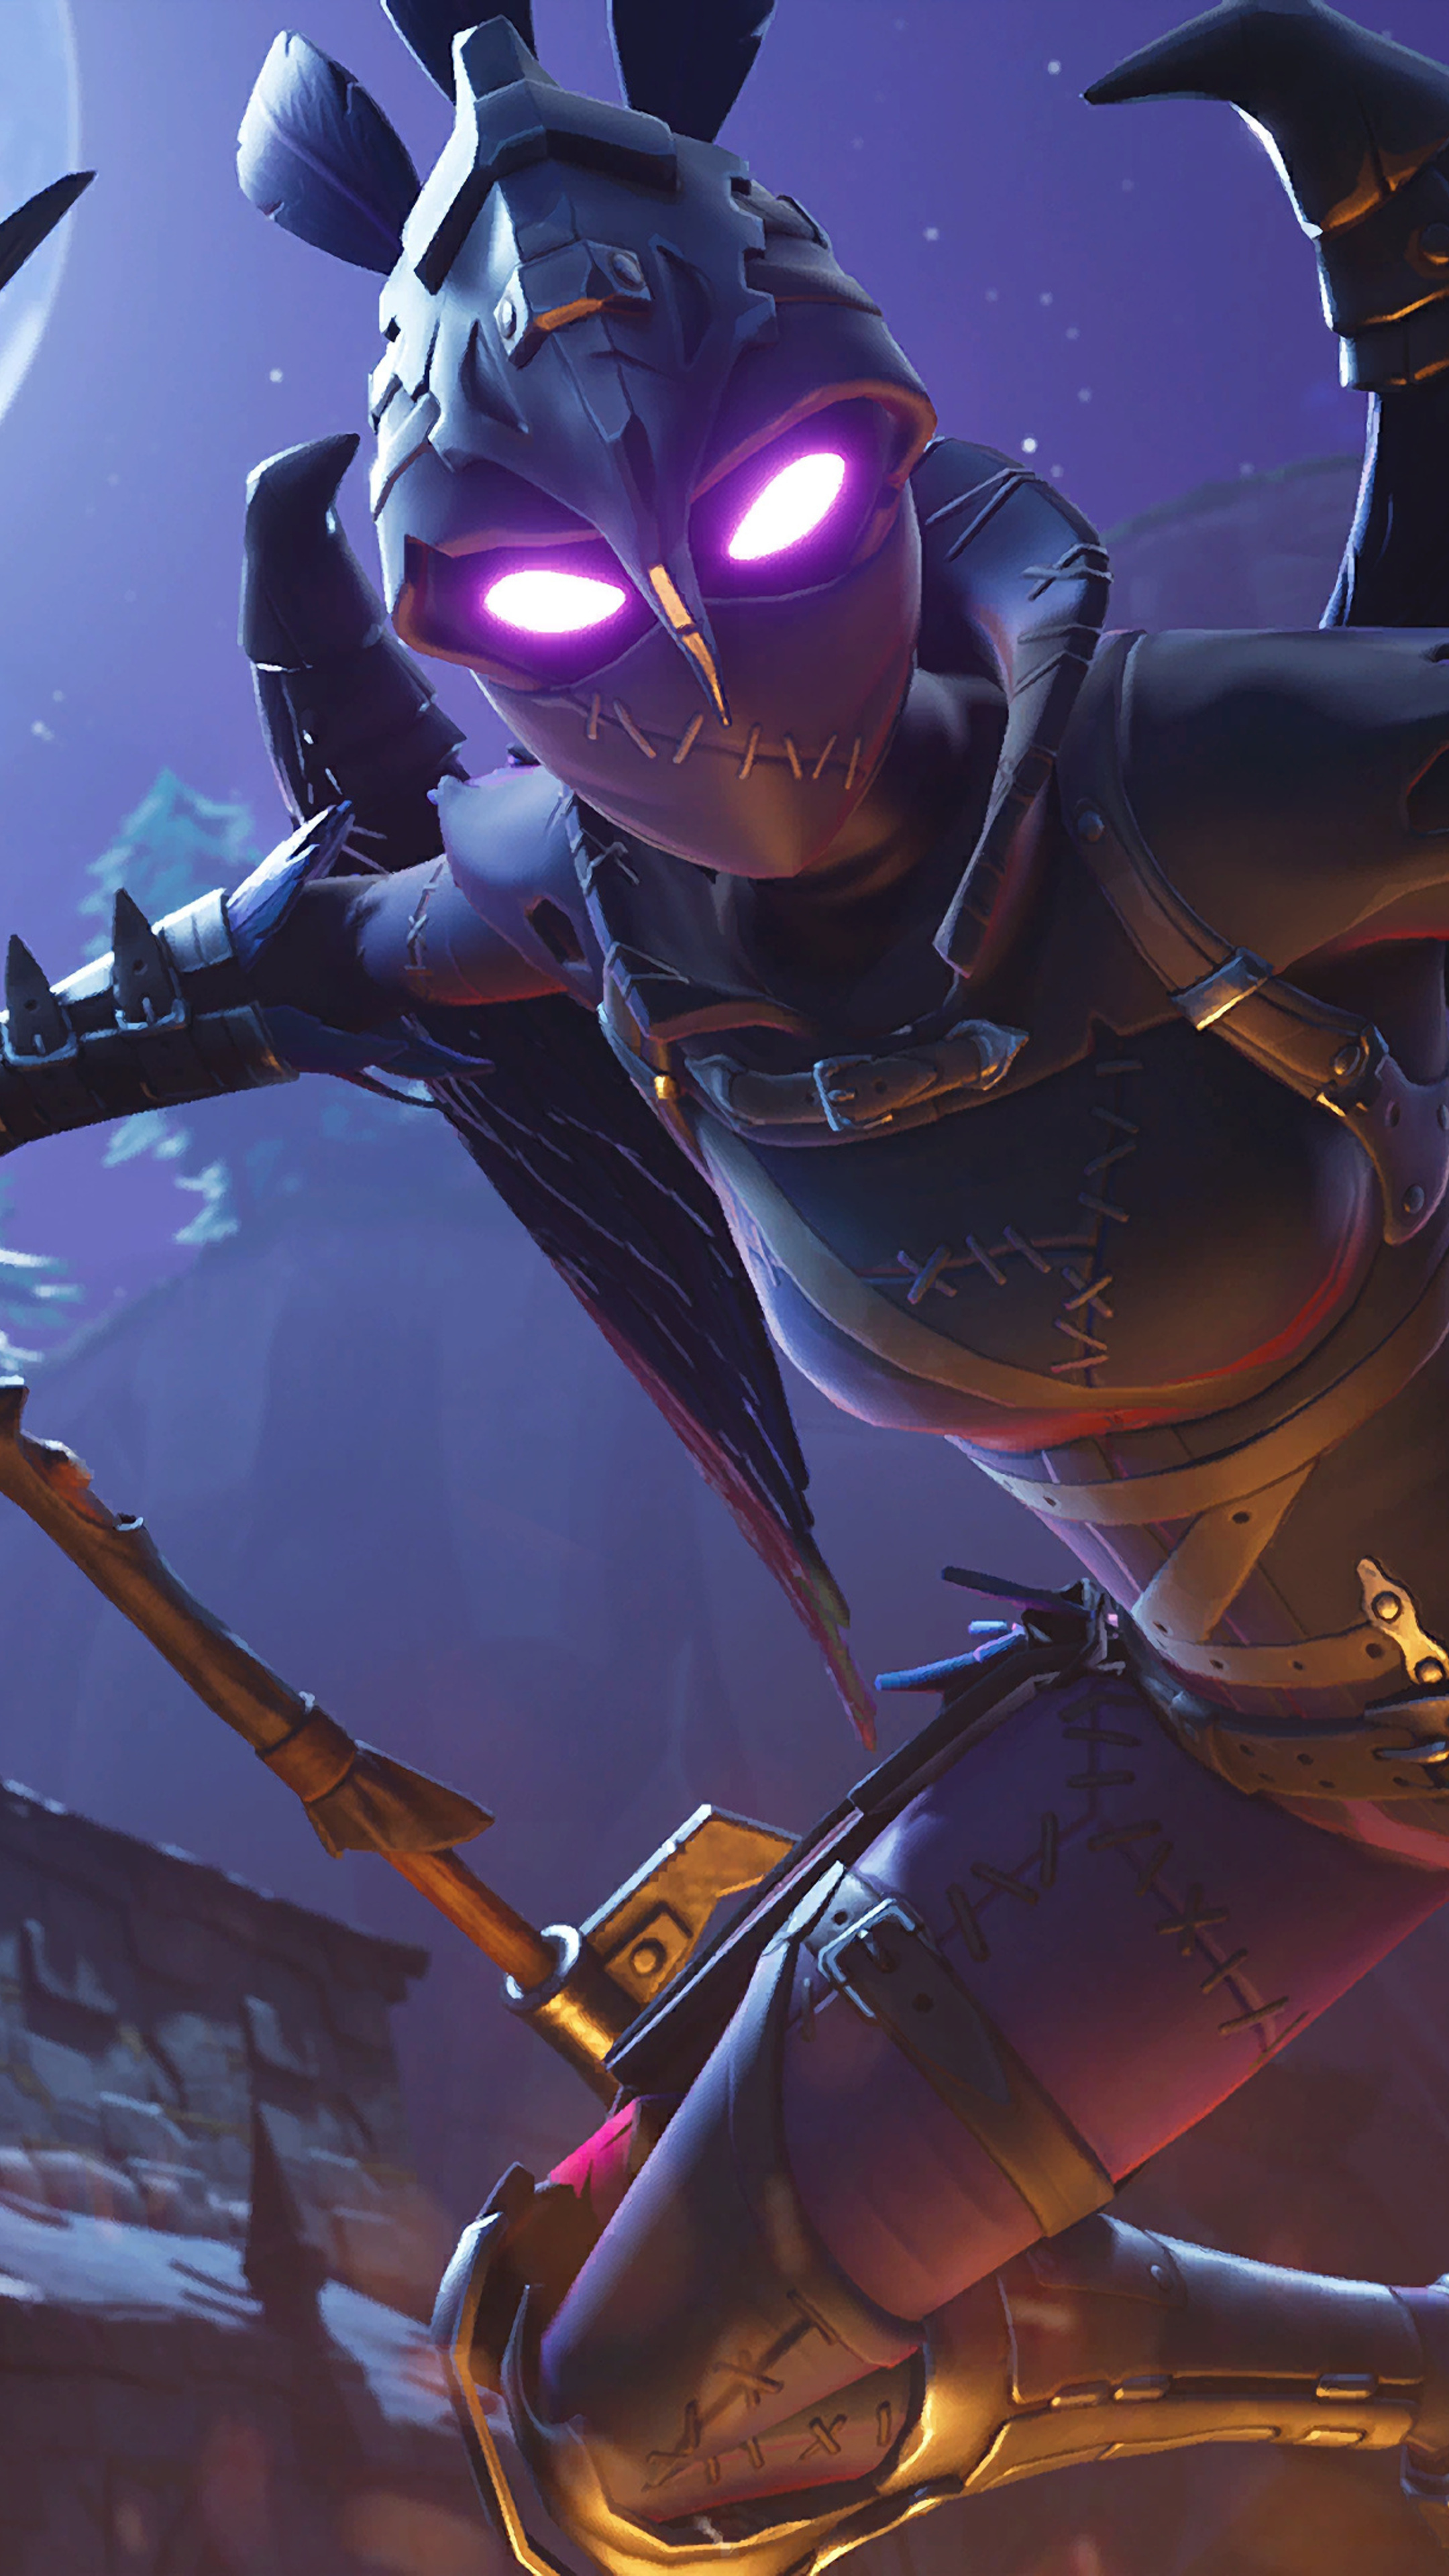 Battle Royale Game, Ravage outfit, Fortnite season 6, Gaming excitement, 2160x3840 4K Handy